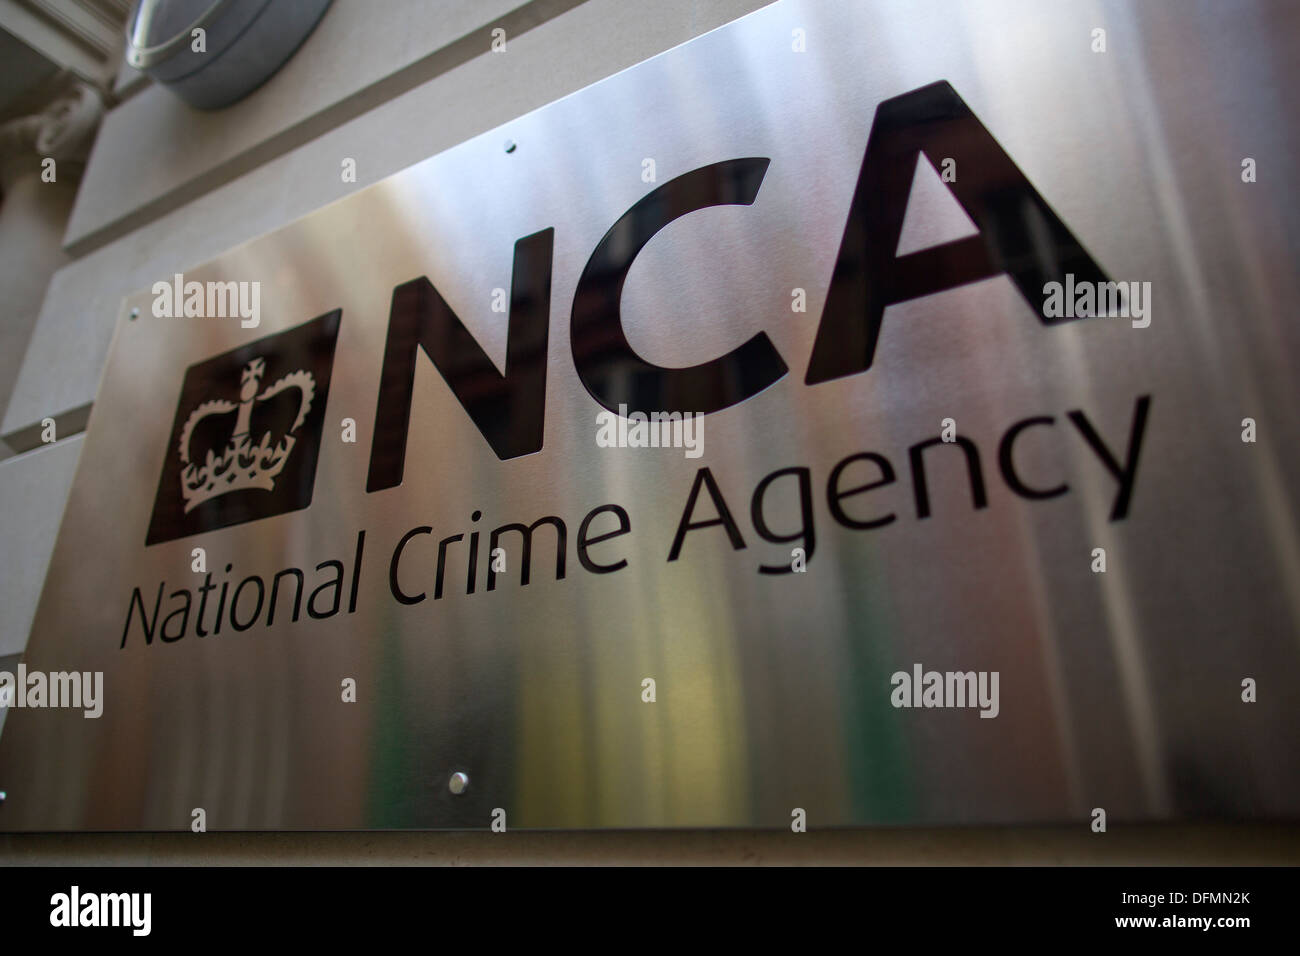 uk-london-the-national-crime-agency-nca-headquarters-are-pictured-DFMN2K.jpg